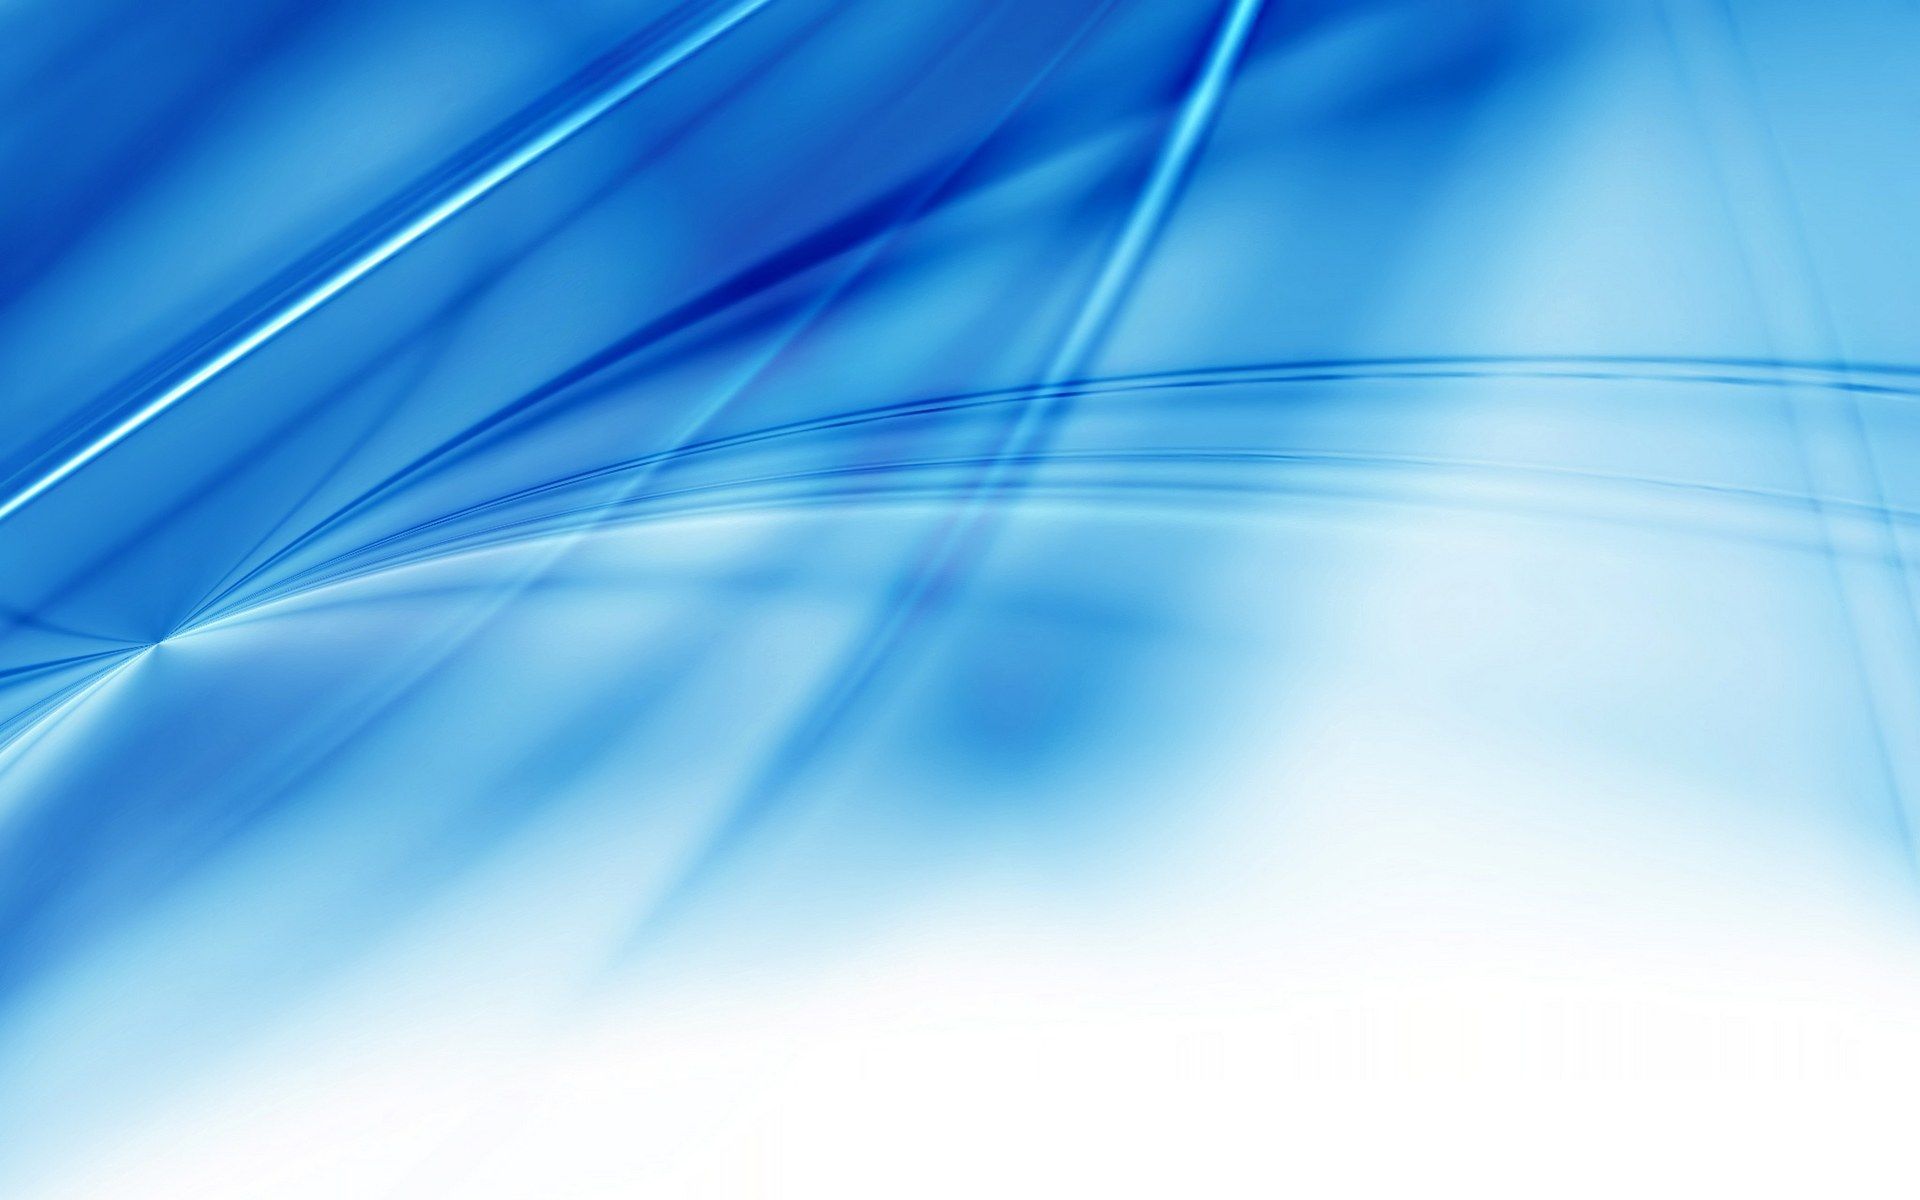 Blue Abstract Background 3158 Hd Wallpapers in Abstract   Imagesci 1920x1200